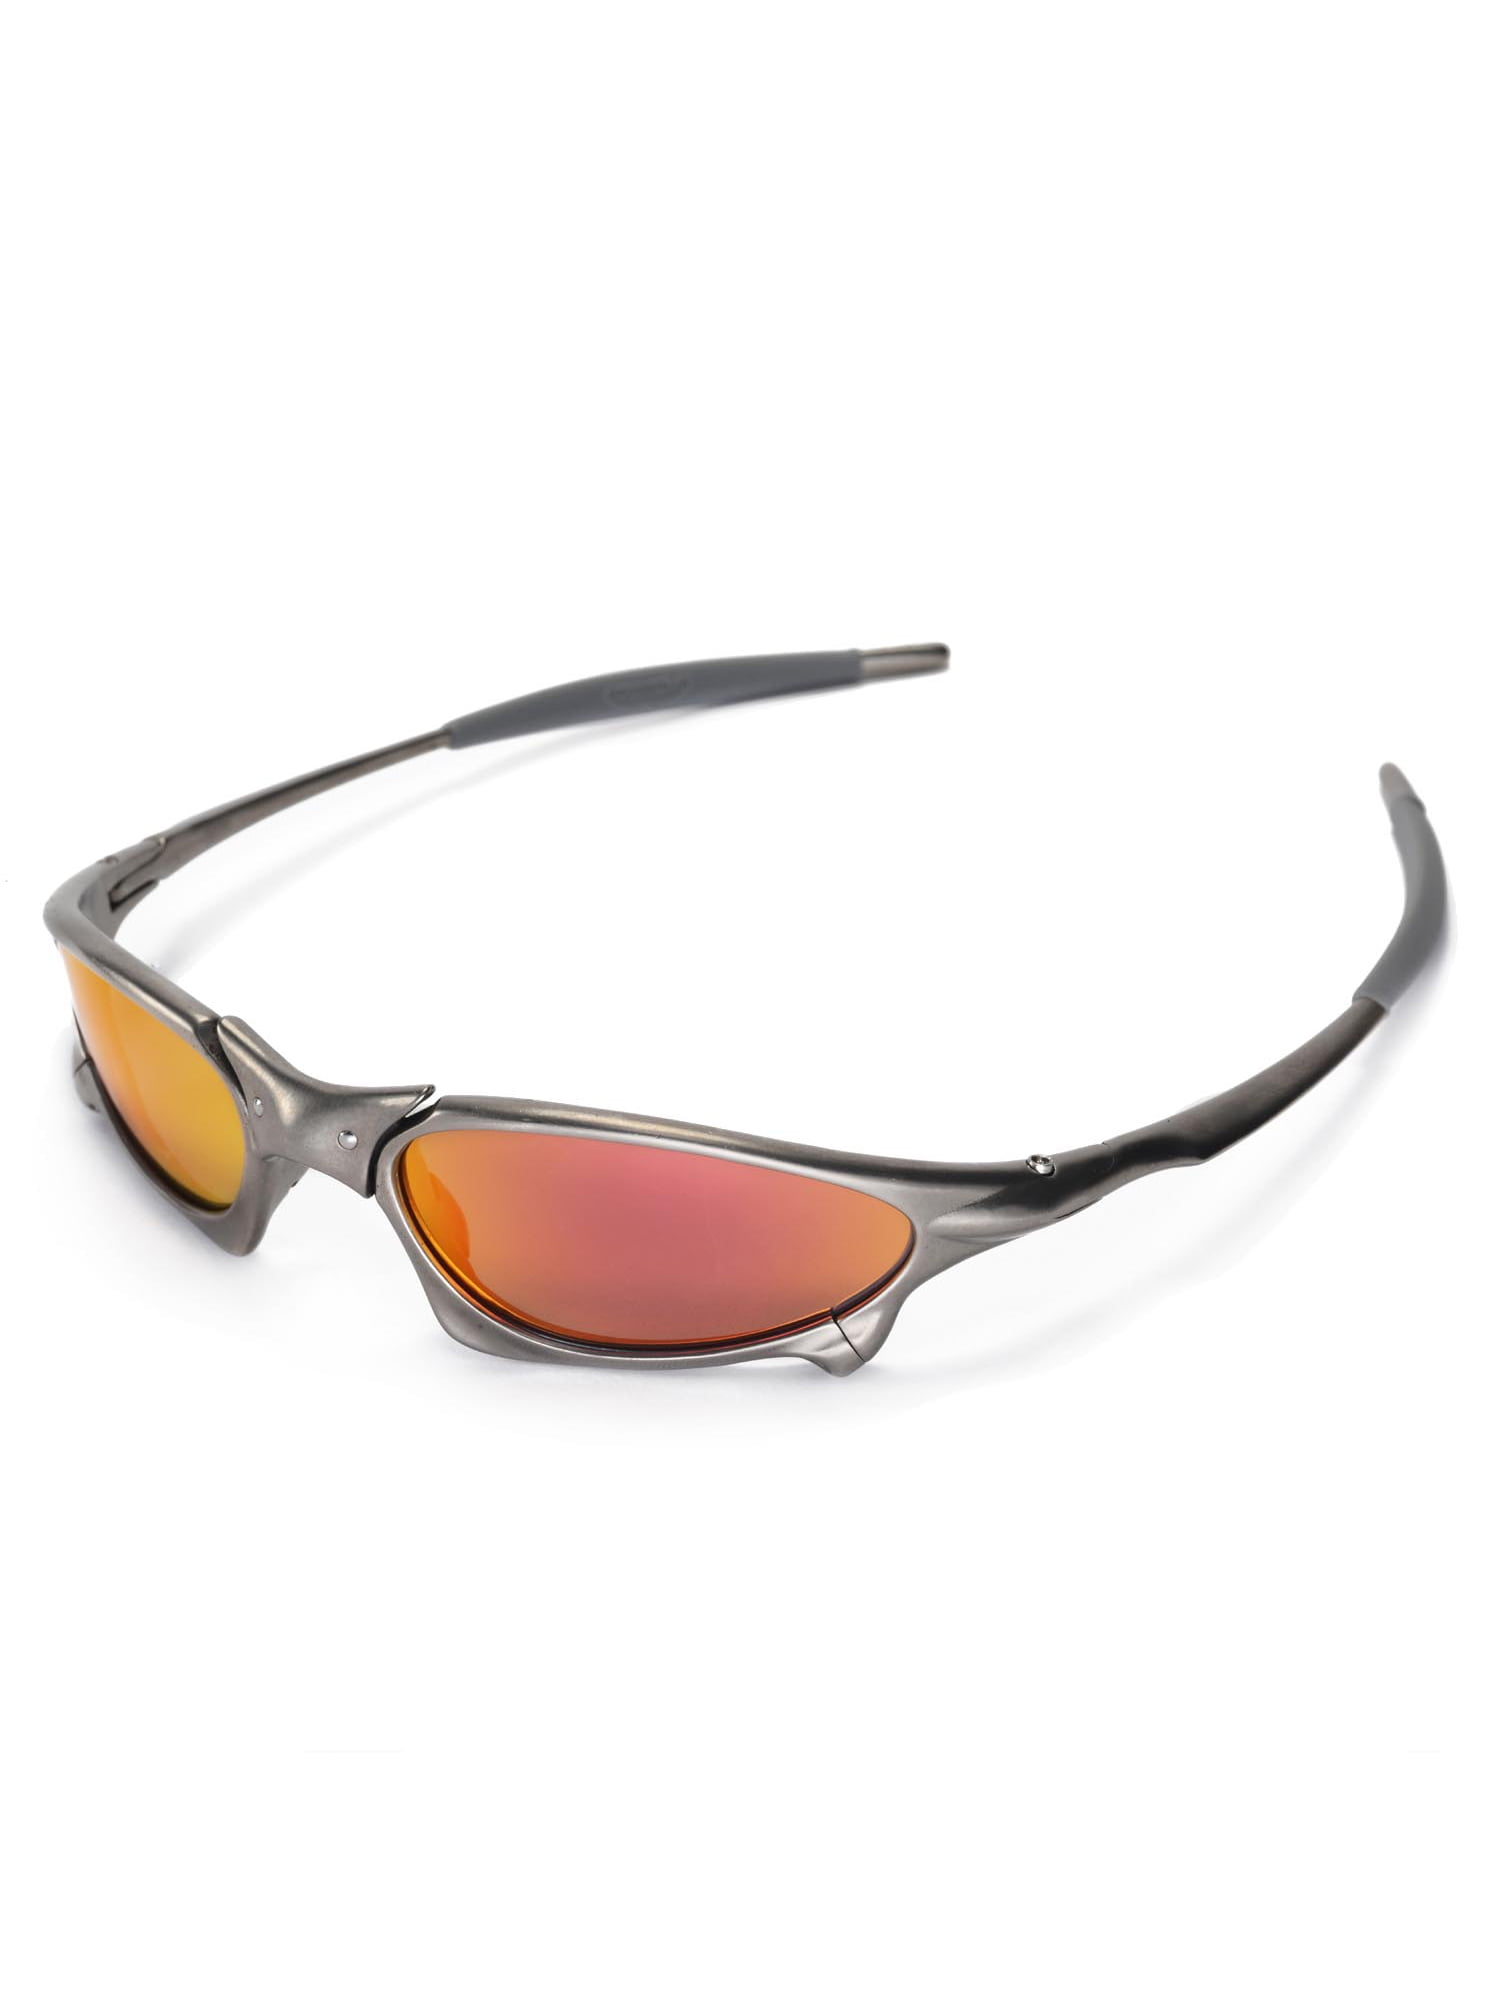 Walleva Emerald Polarized Replacement Lenses for Oakley Penny